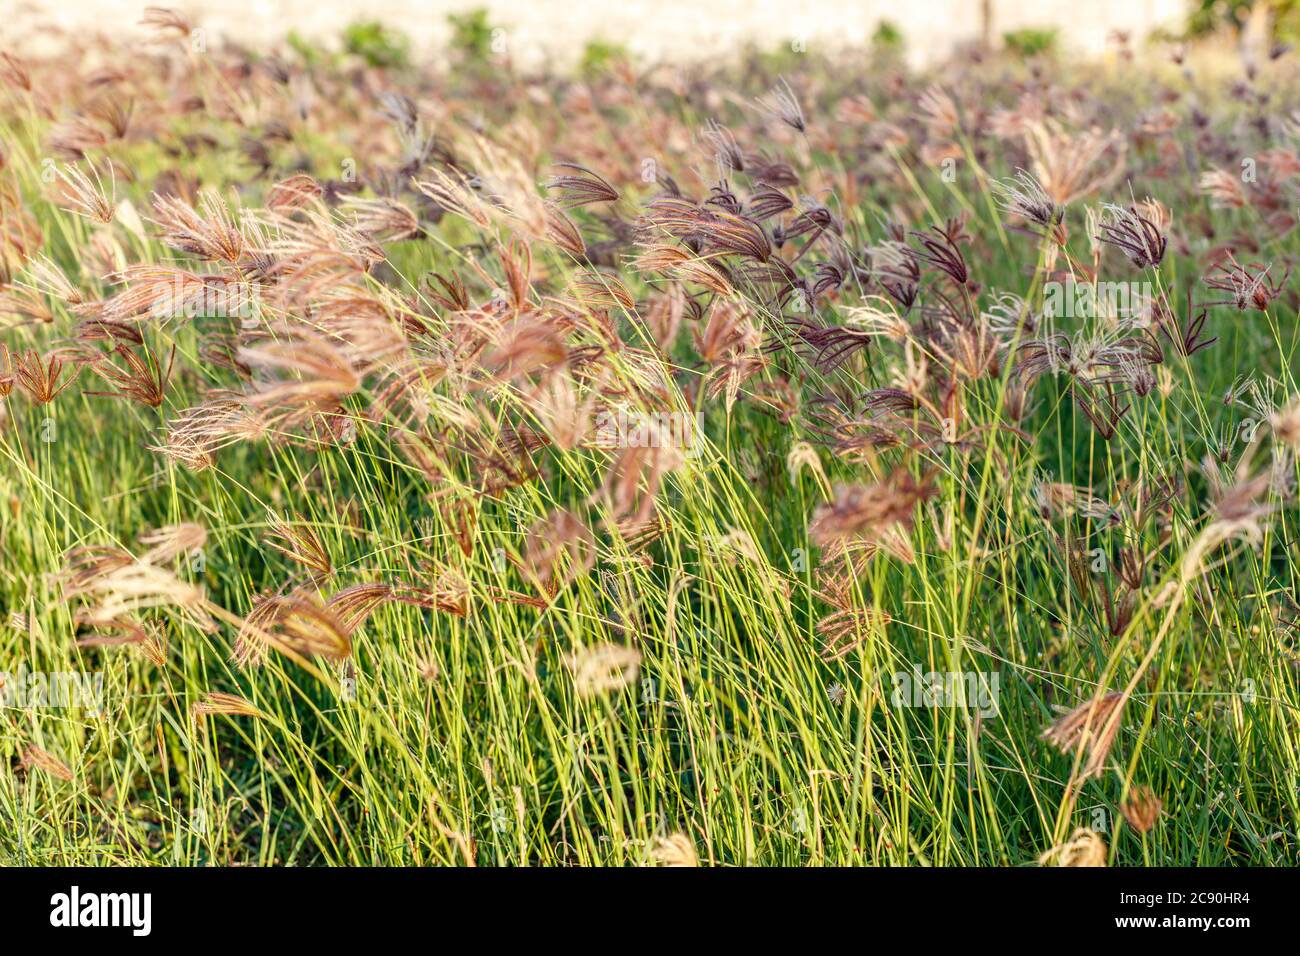 Chloris gayana or Rhodes grass growing on the field. Rural landscape. Bali Island, Indonesia. Natural background. Stock Photo